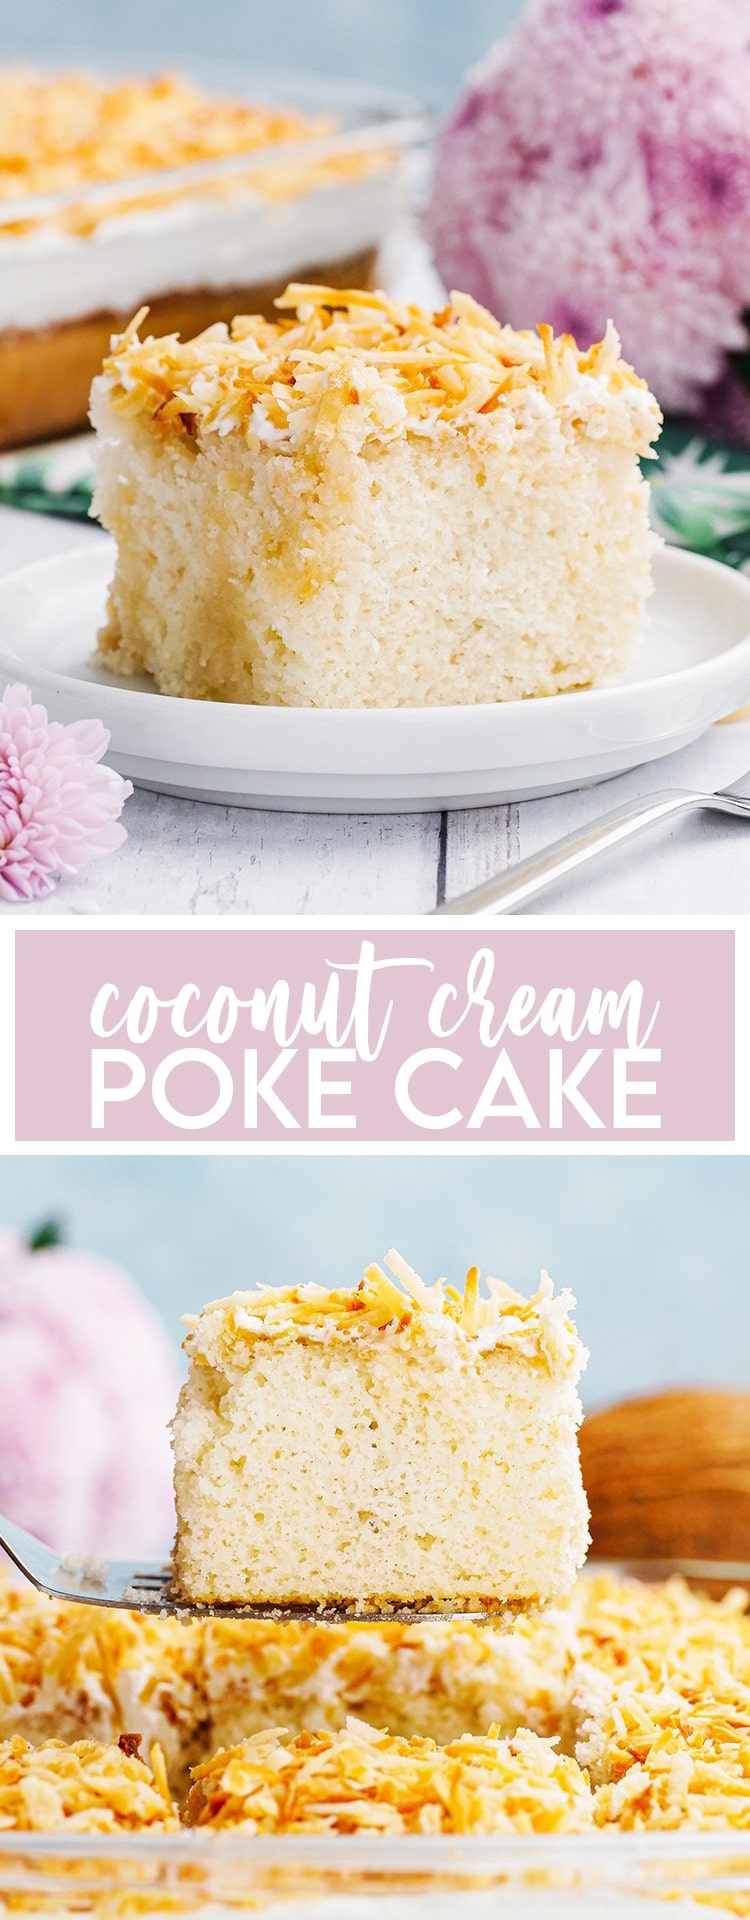 Coconut cream poke cake collage with text overlay that reads coconut cream poke cake.